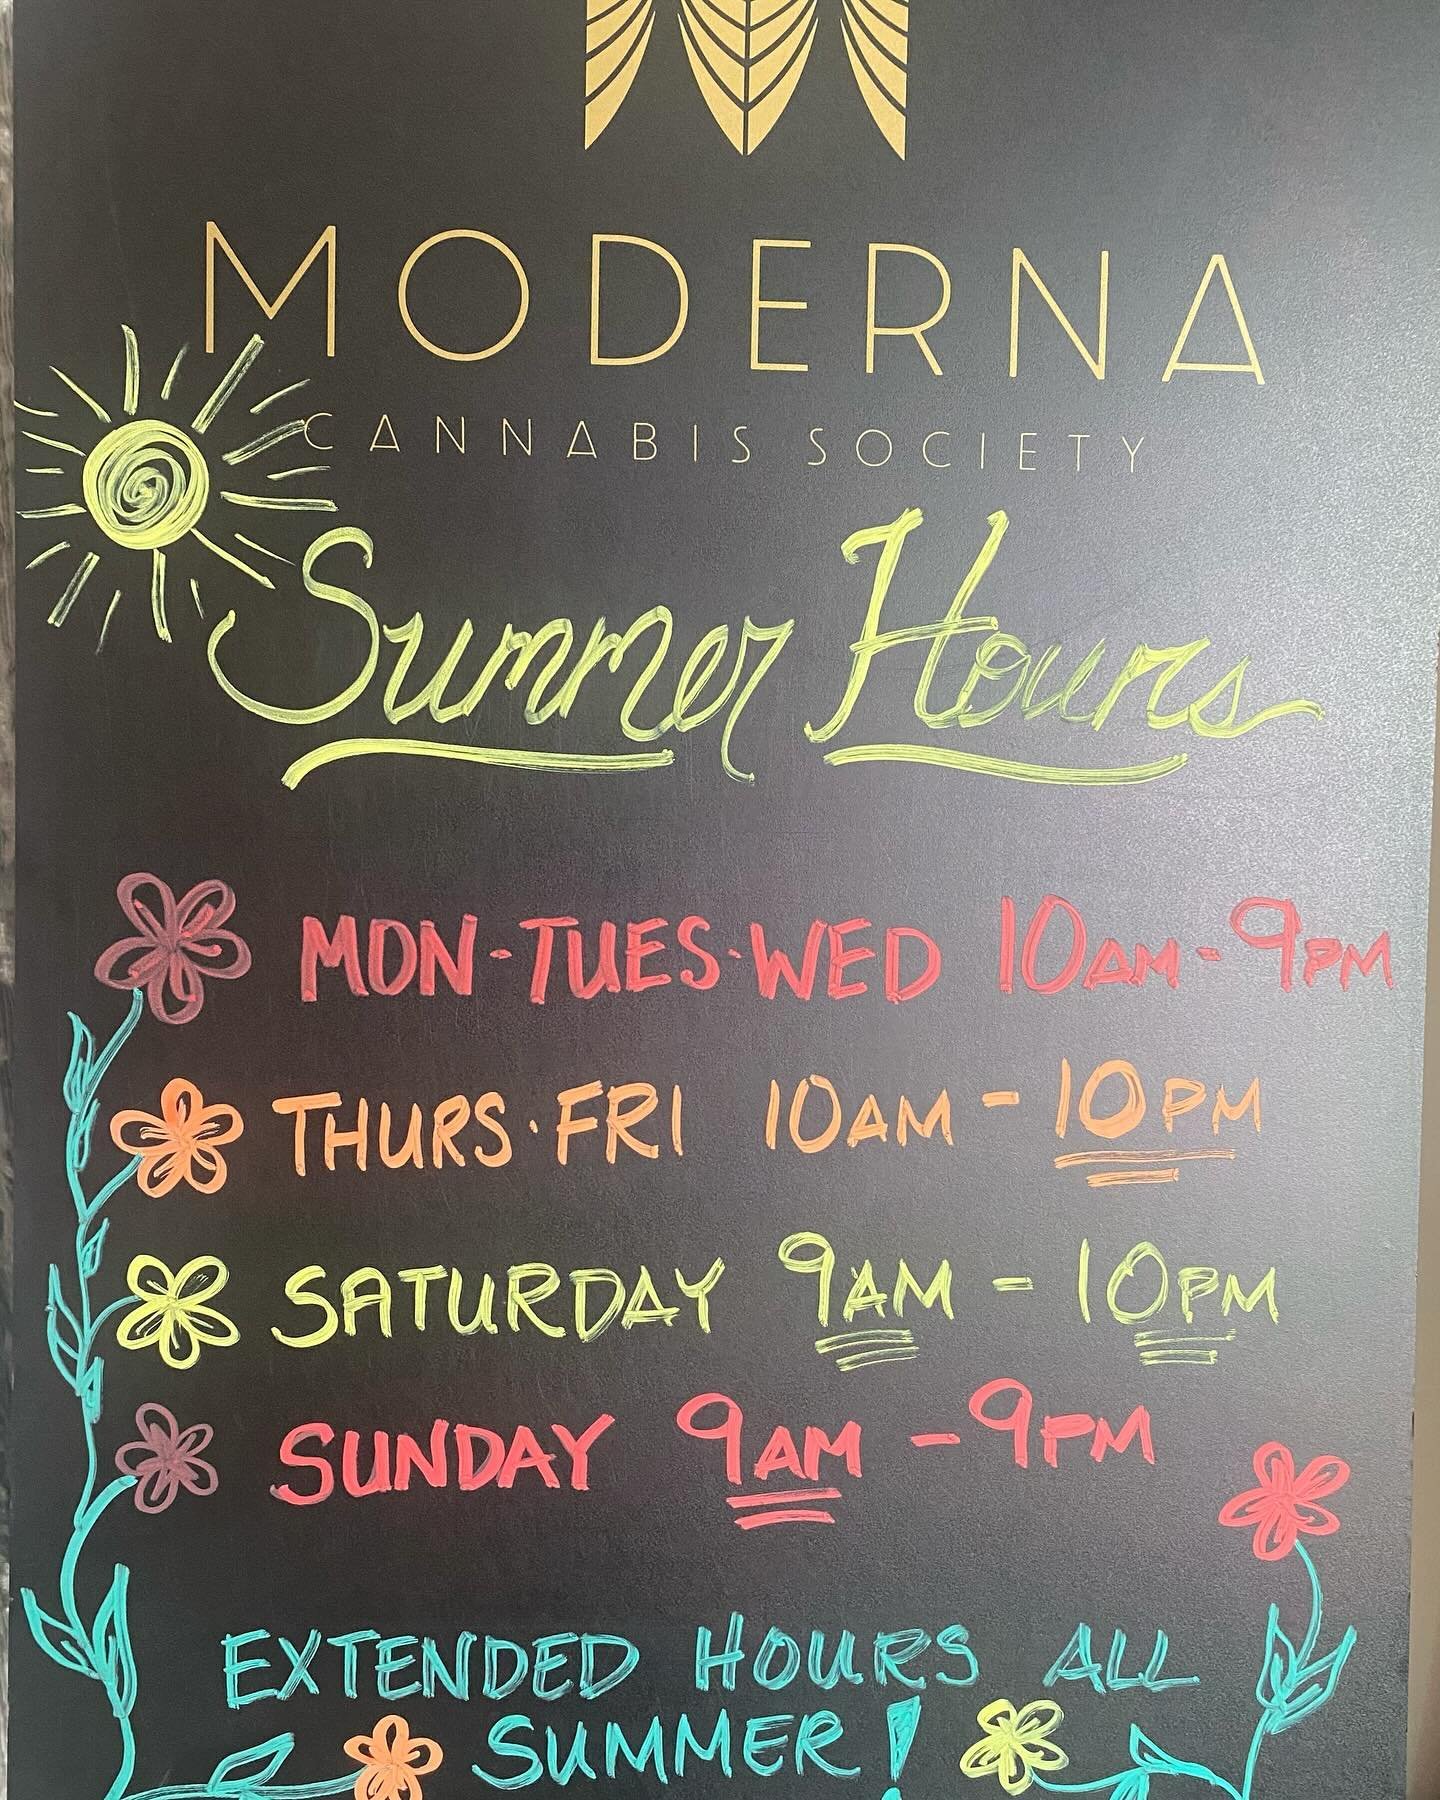 While it may not feel like summer with all the snow this week, our Extended Summer Hours are now in effect.  Open longer so you can make the most of your summer weekends!